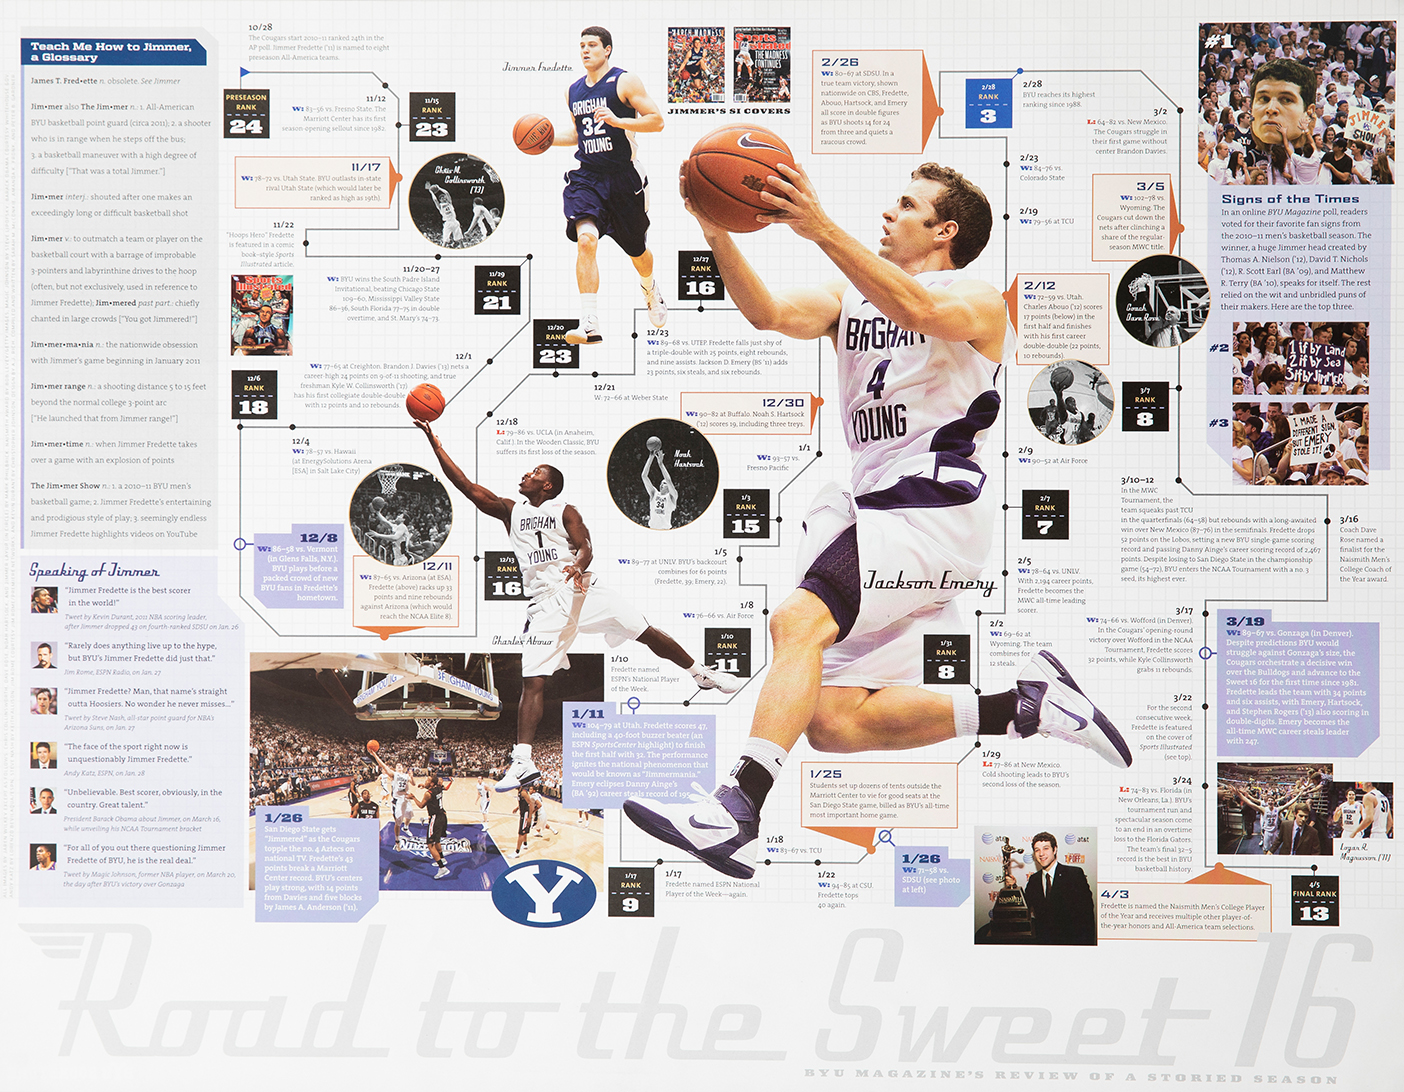 An infographic details BYU's road to the Sweet Sixteen in the 2011 season.